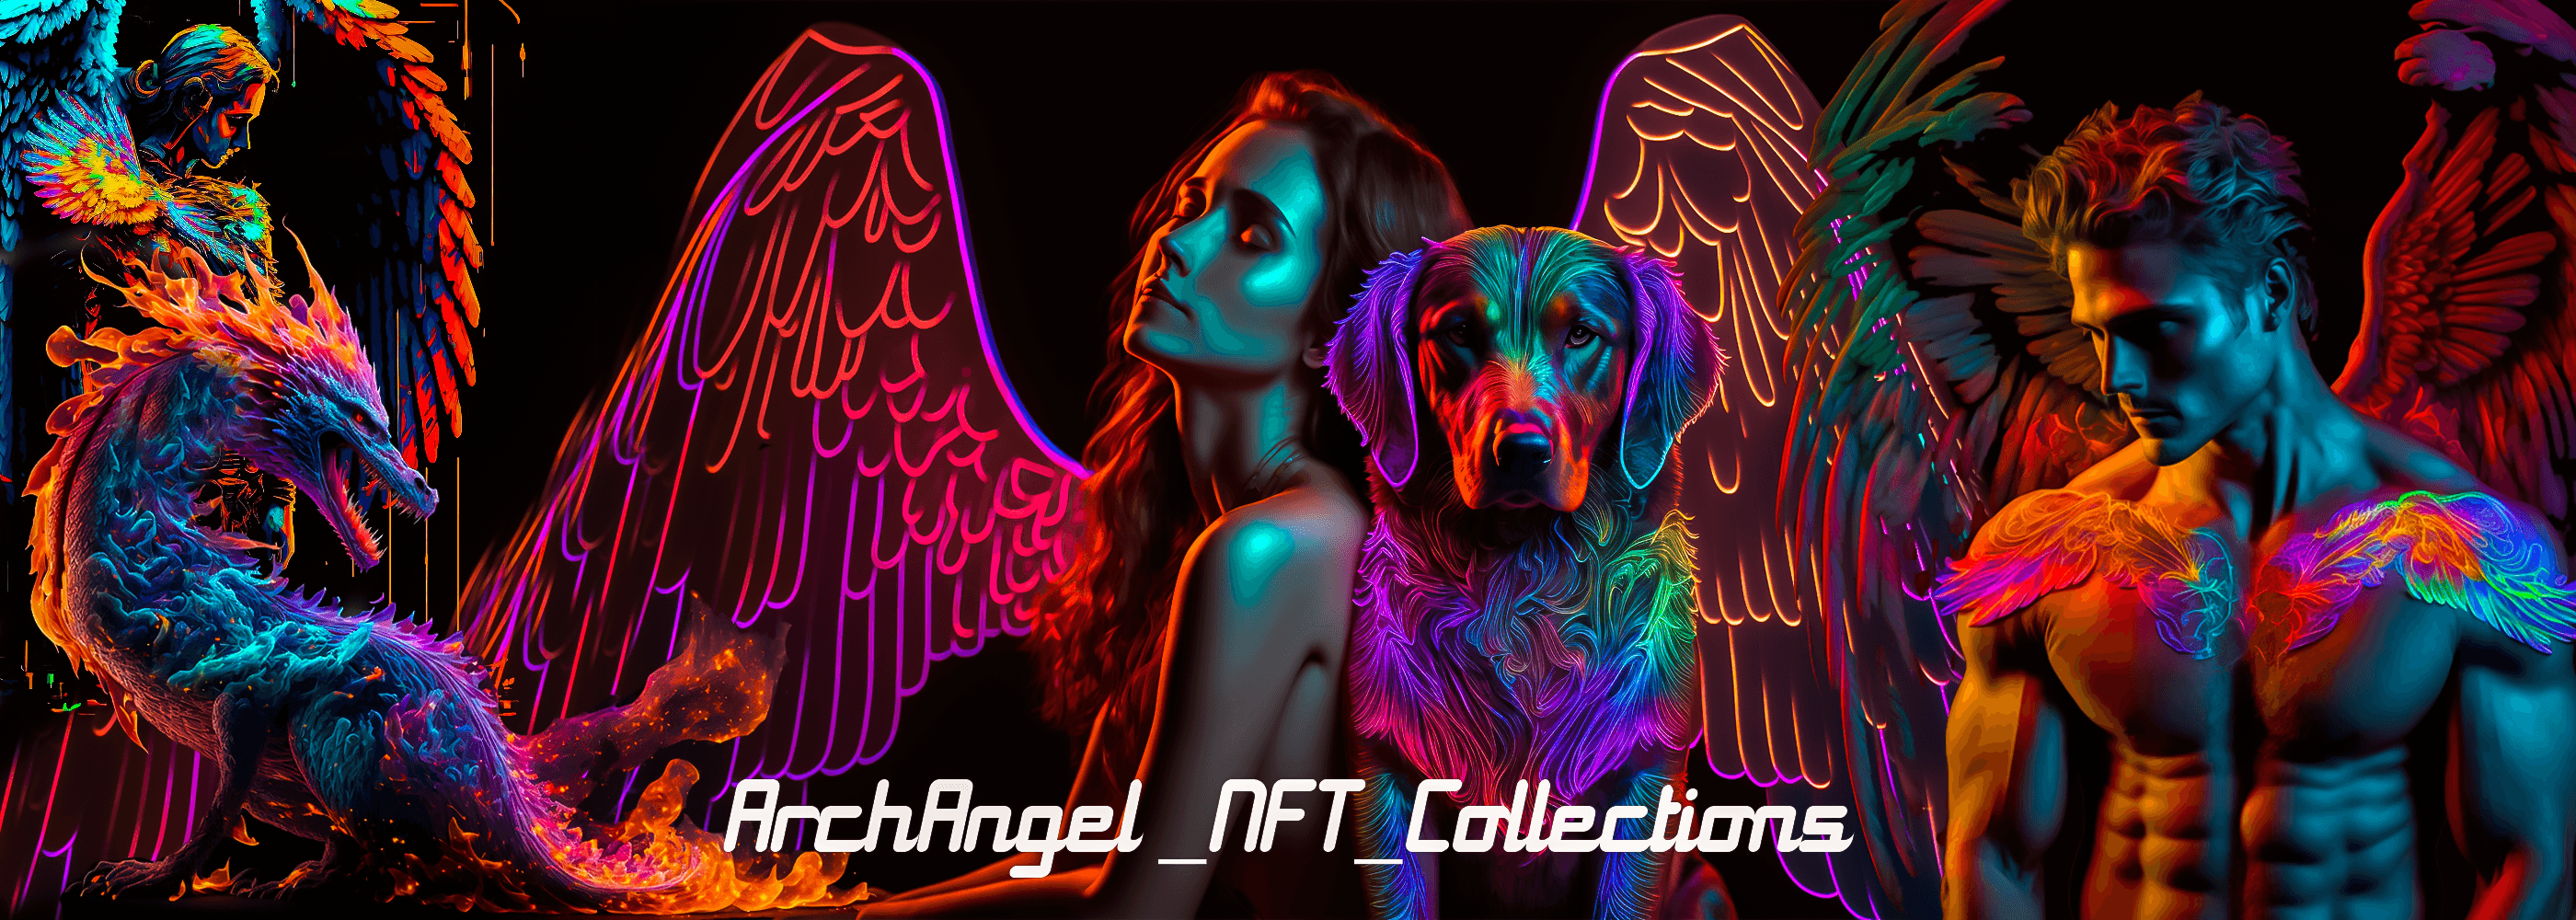 ArchAngel_NFT_Collections 배너